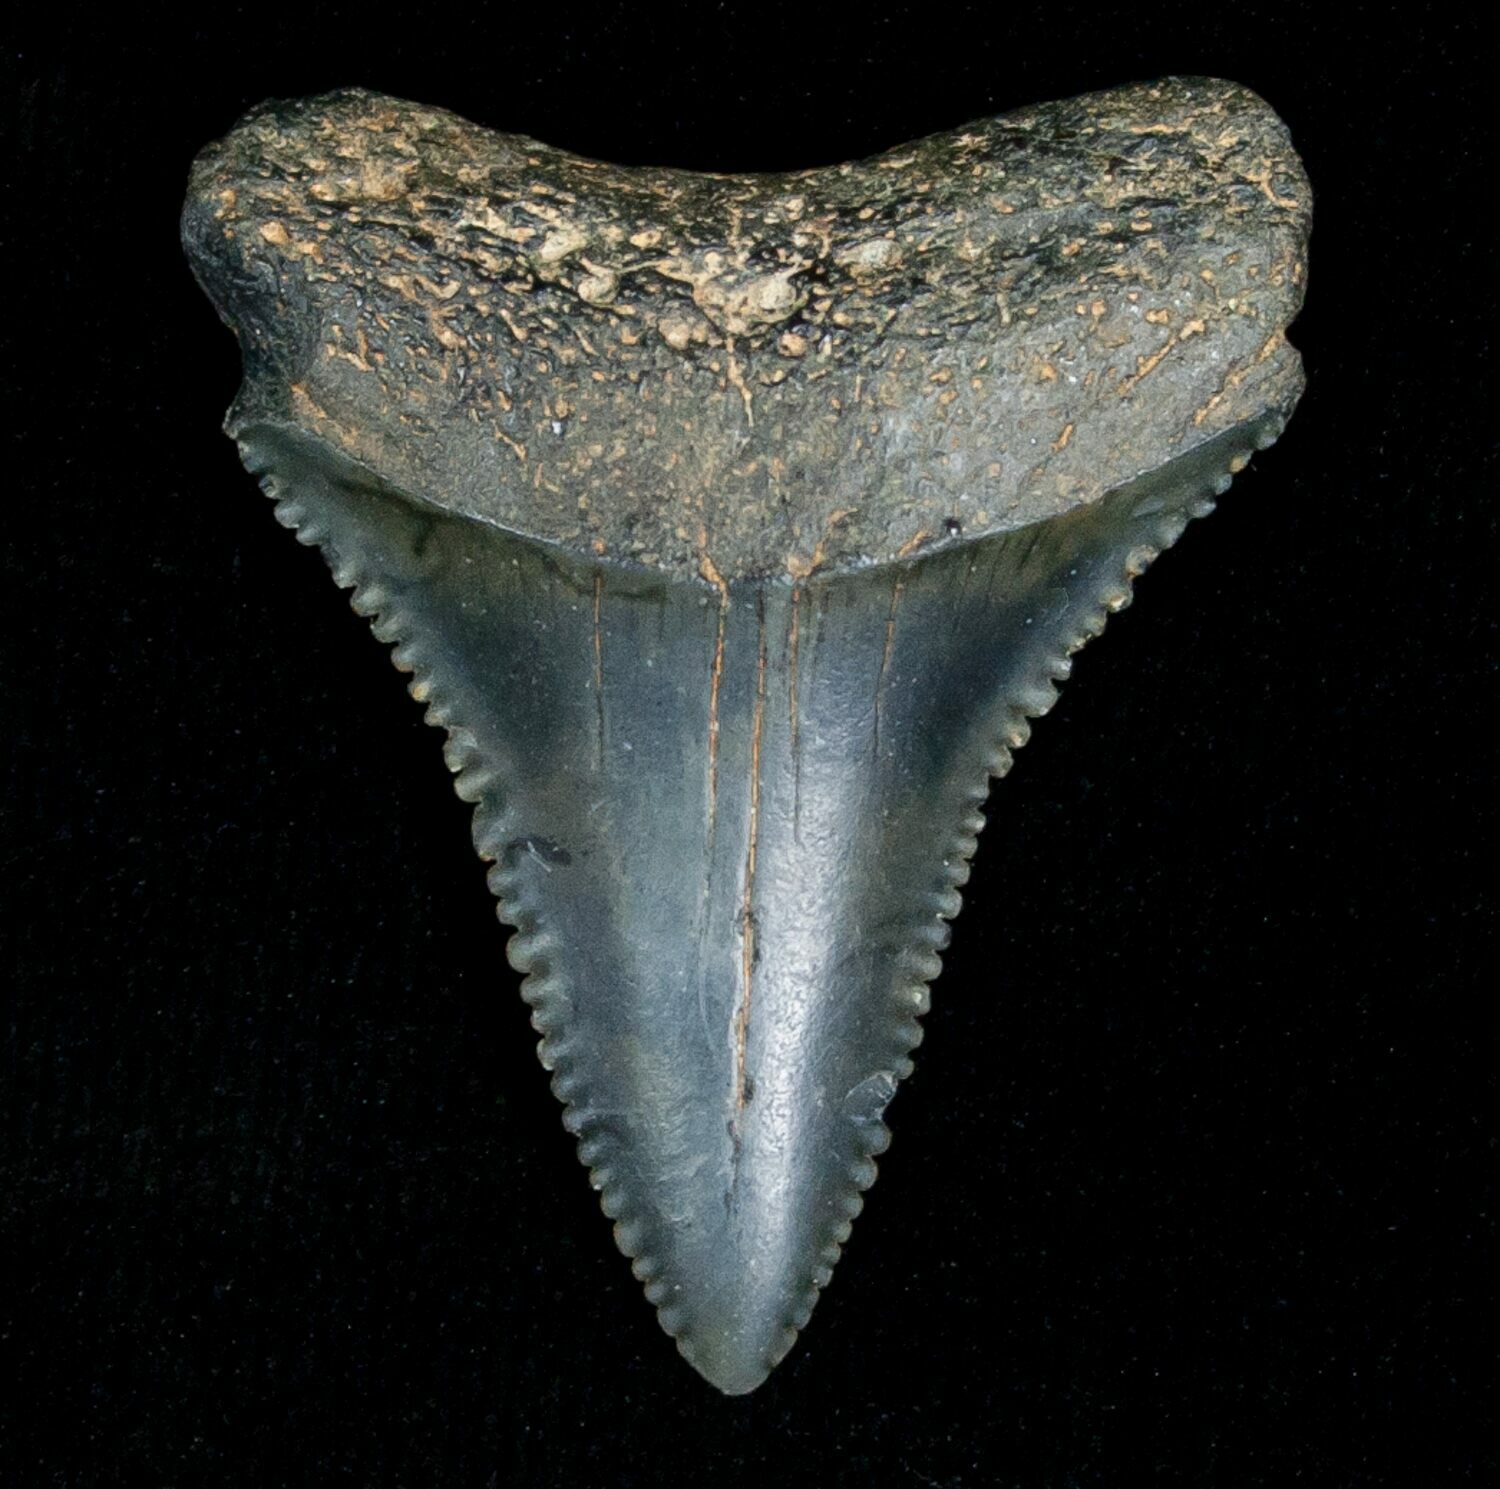 Fossil Great White Shark Tooth - 1.33 Inches For Sale (#5147